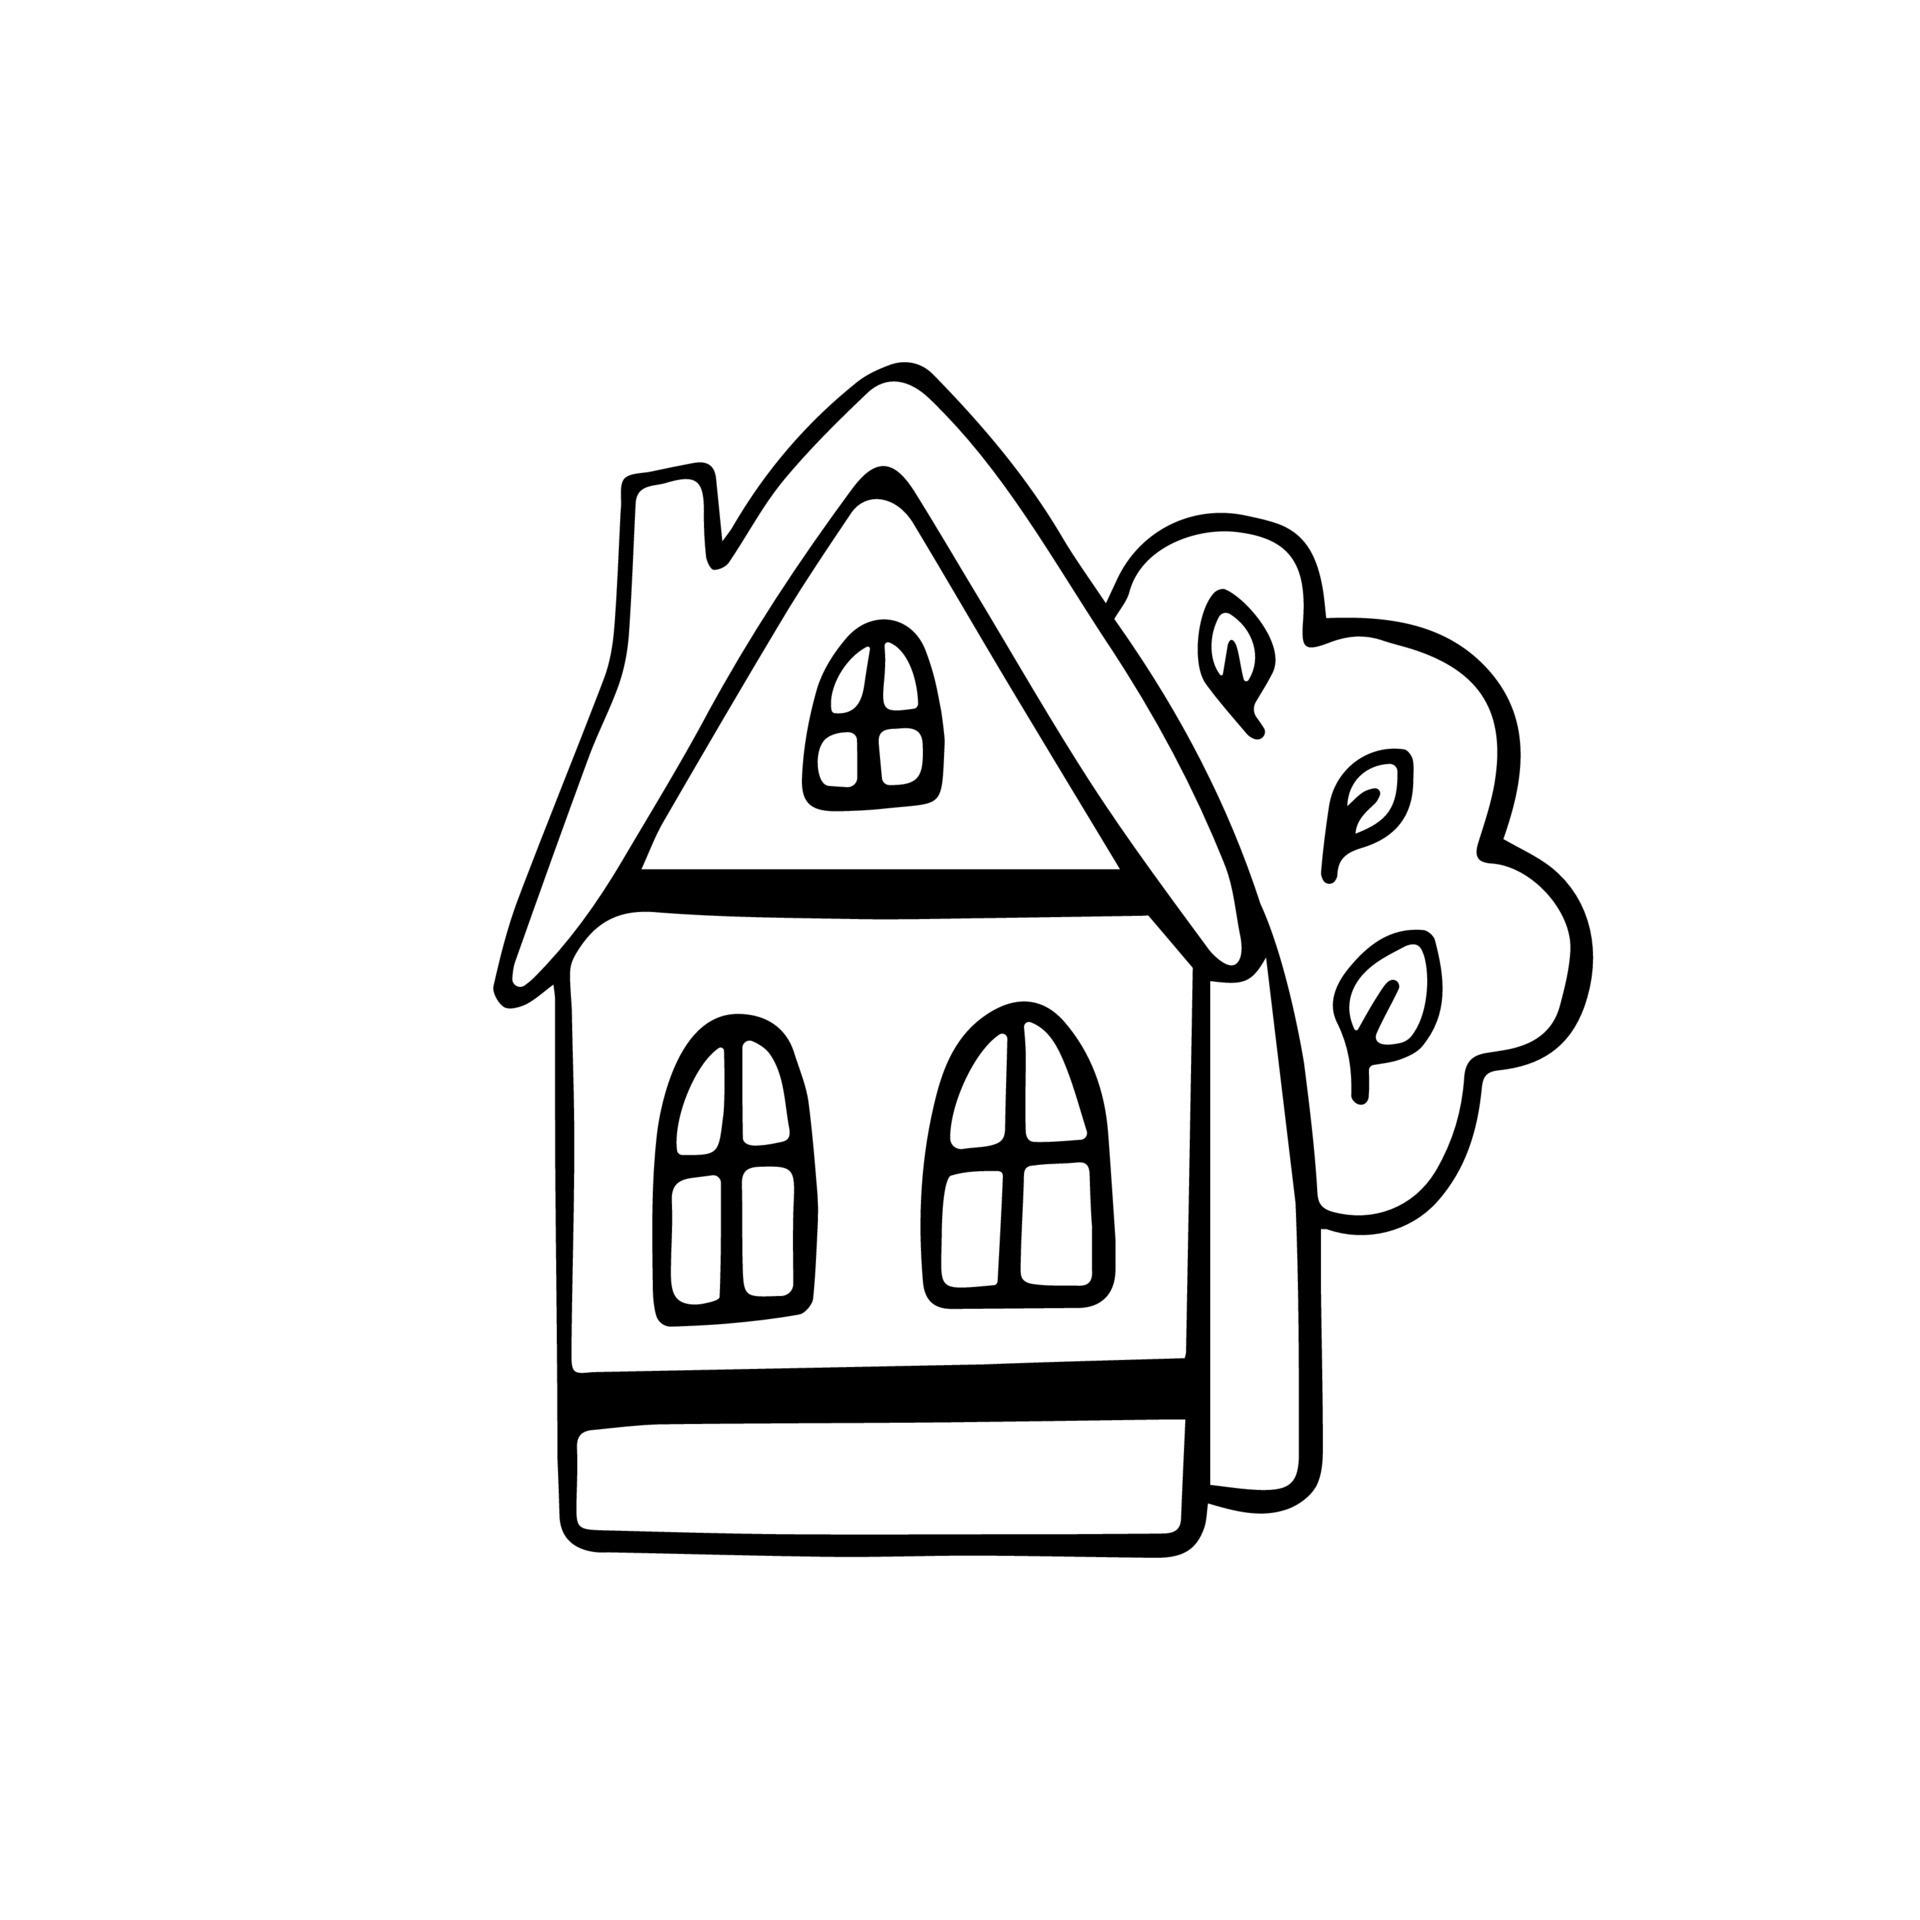 Picture of a House Outline Drawing Worksheet | Design-saigonsouth.com.vn